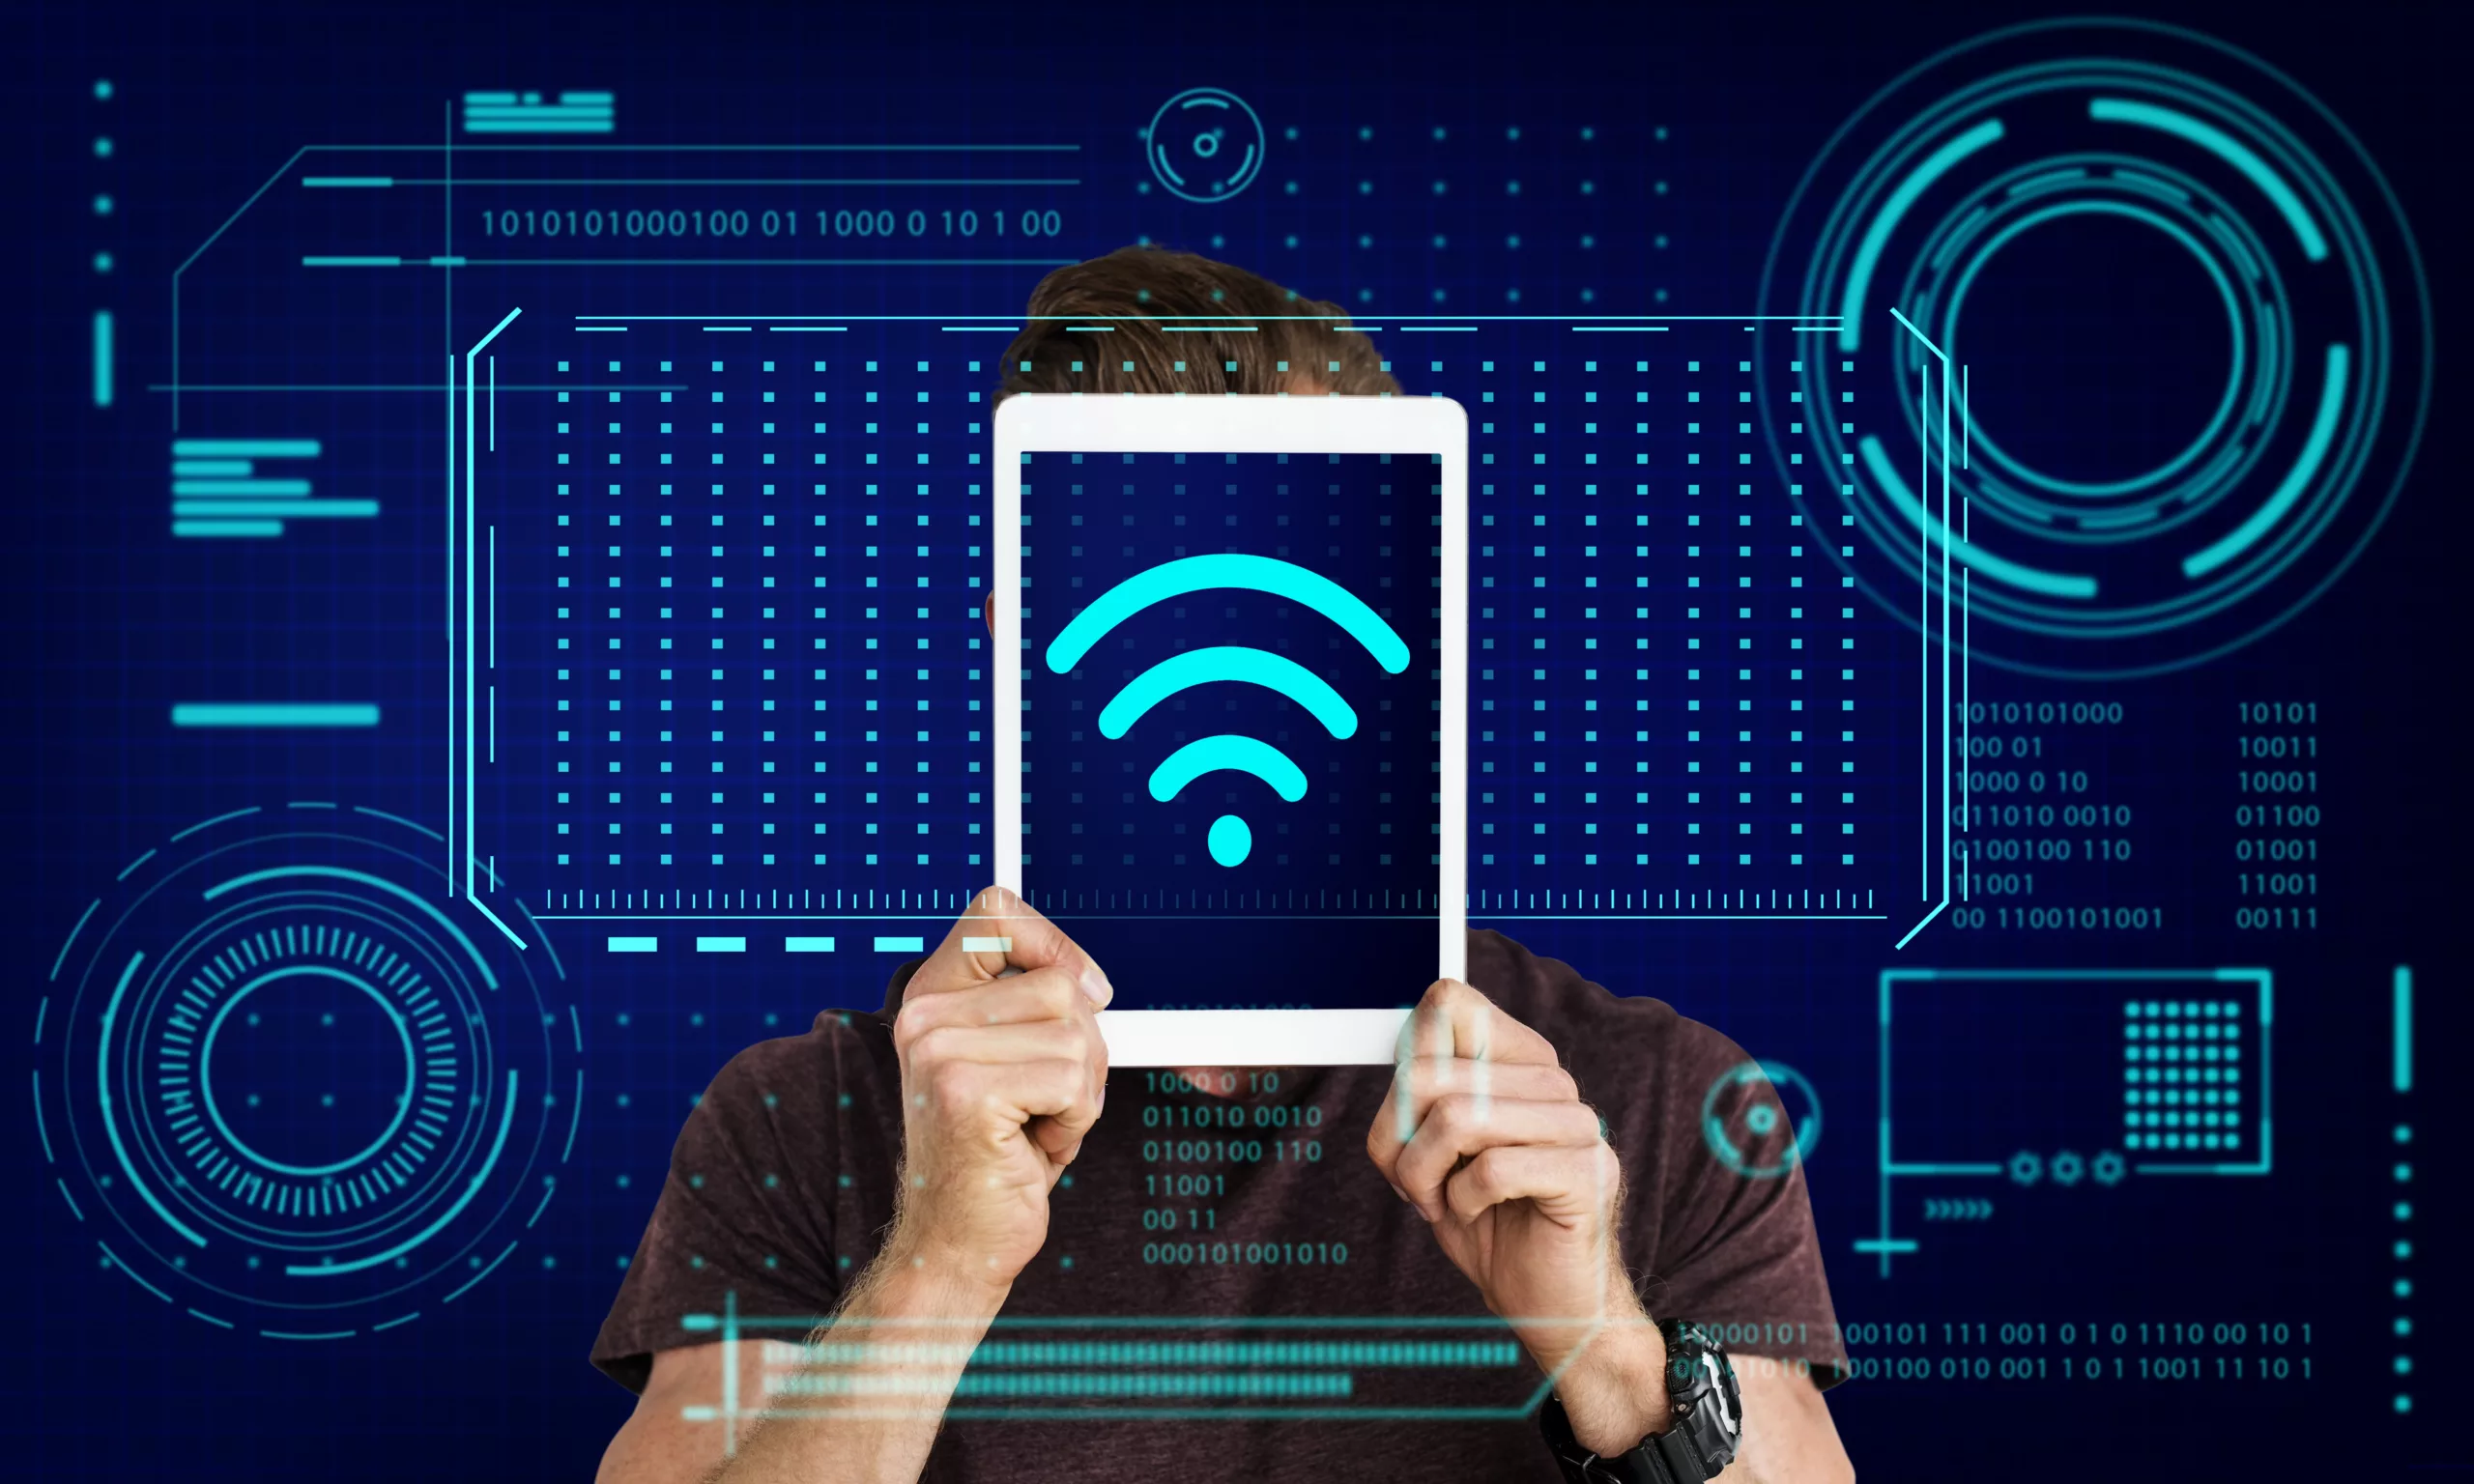 What is WiFi 6 and What are Its Benefits - Secure Networking For Enterprise